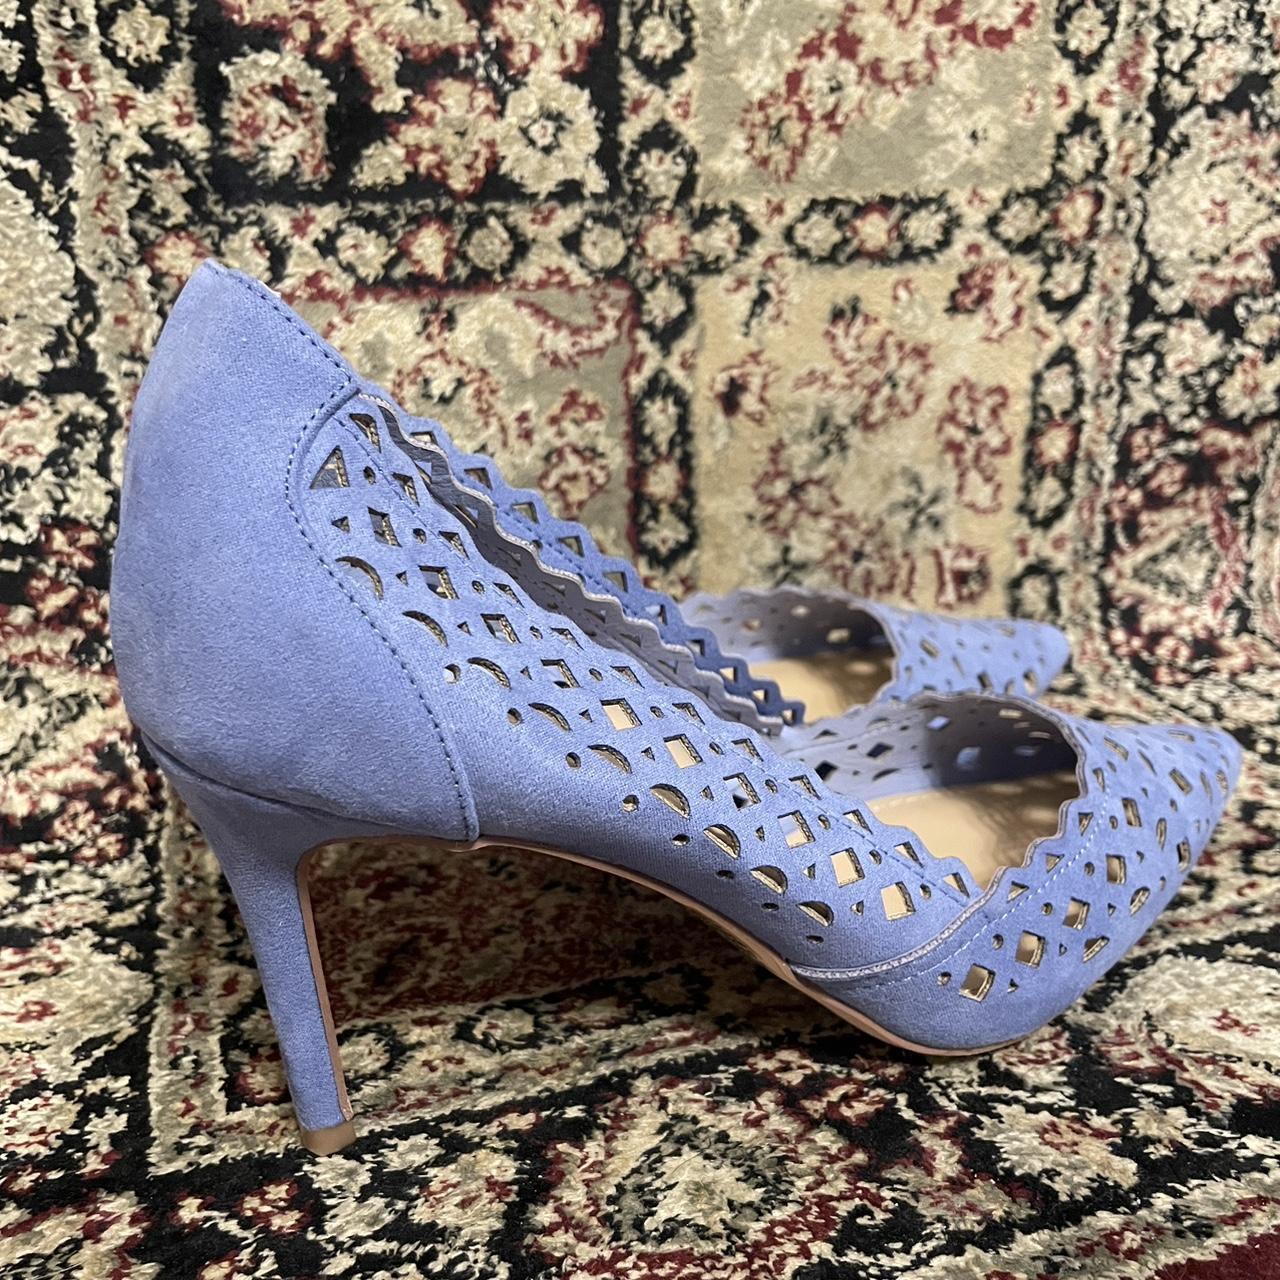 Ayesha Curry Women's Pumps - Blue - US 9